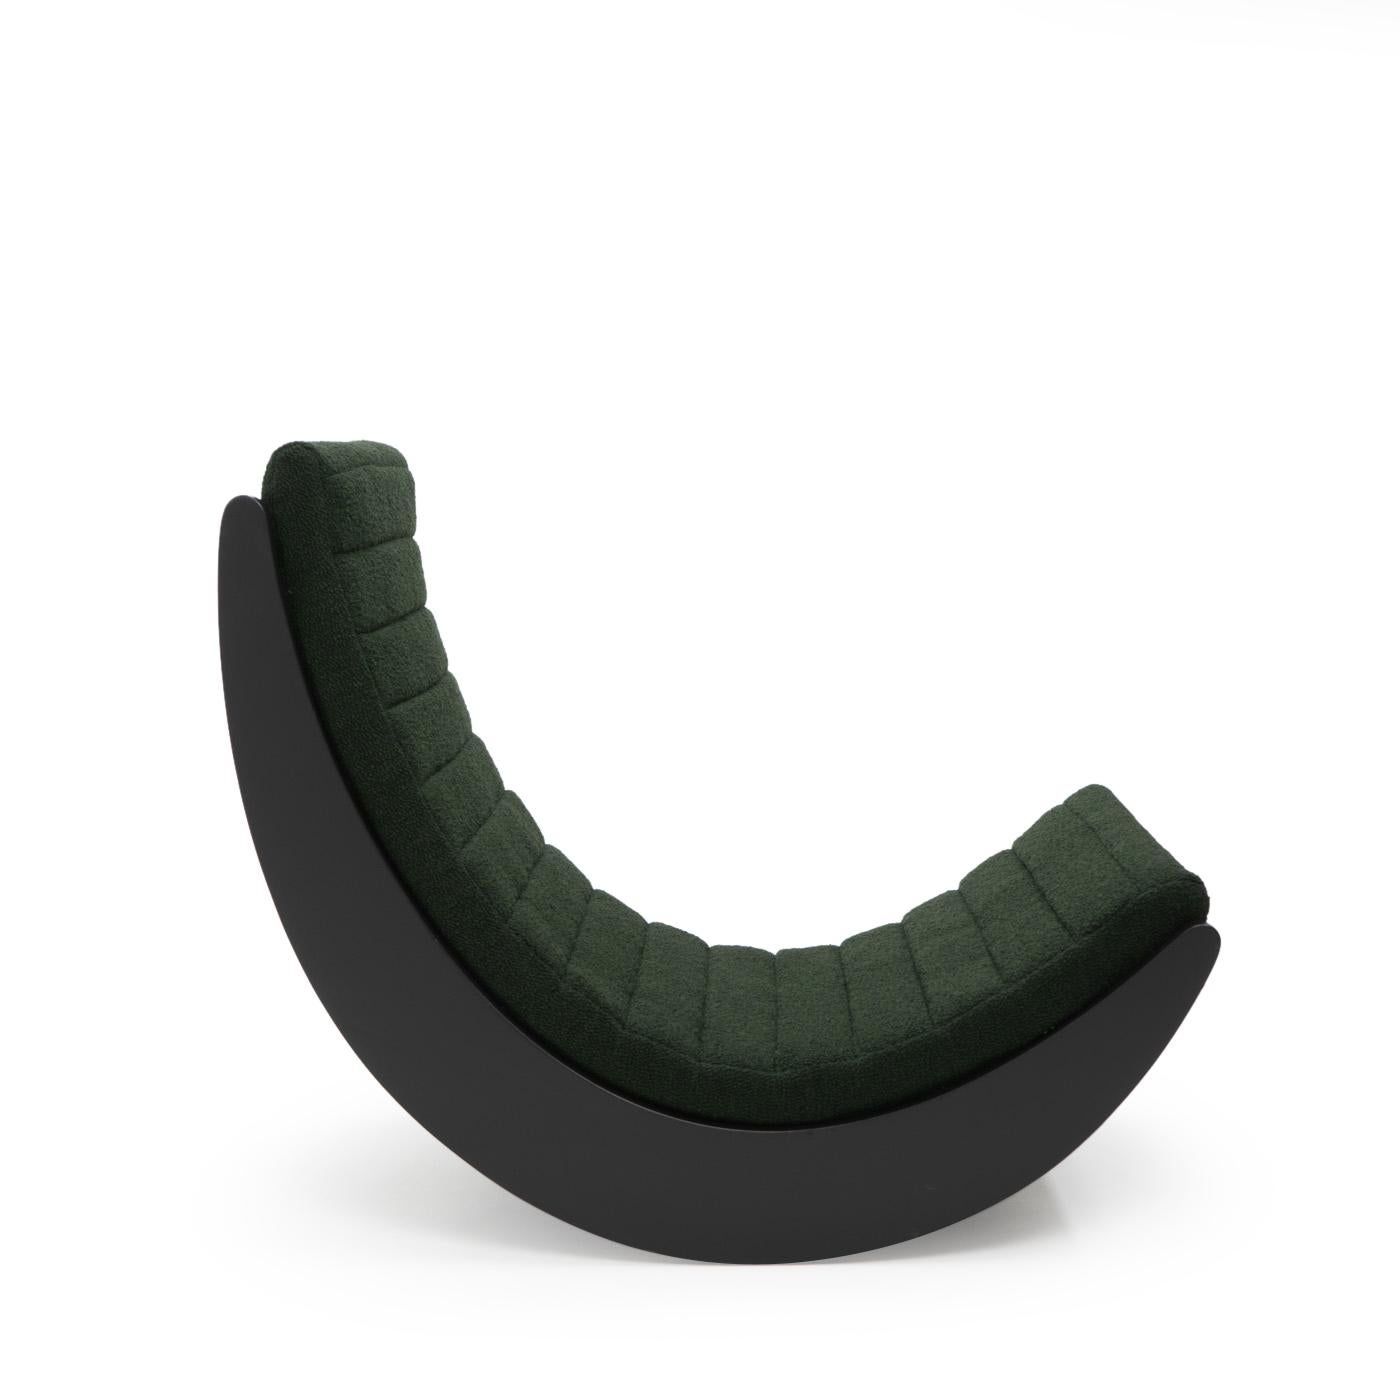 Relaxer II rocking chair designed by Verner Panton, produced by Rosenthal, Germany during the 1970s.

The rocking chair consists of a black lacquered wooden curved structure with a fabric cushion attached. We have re-upholstered the cushion with a